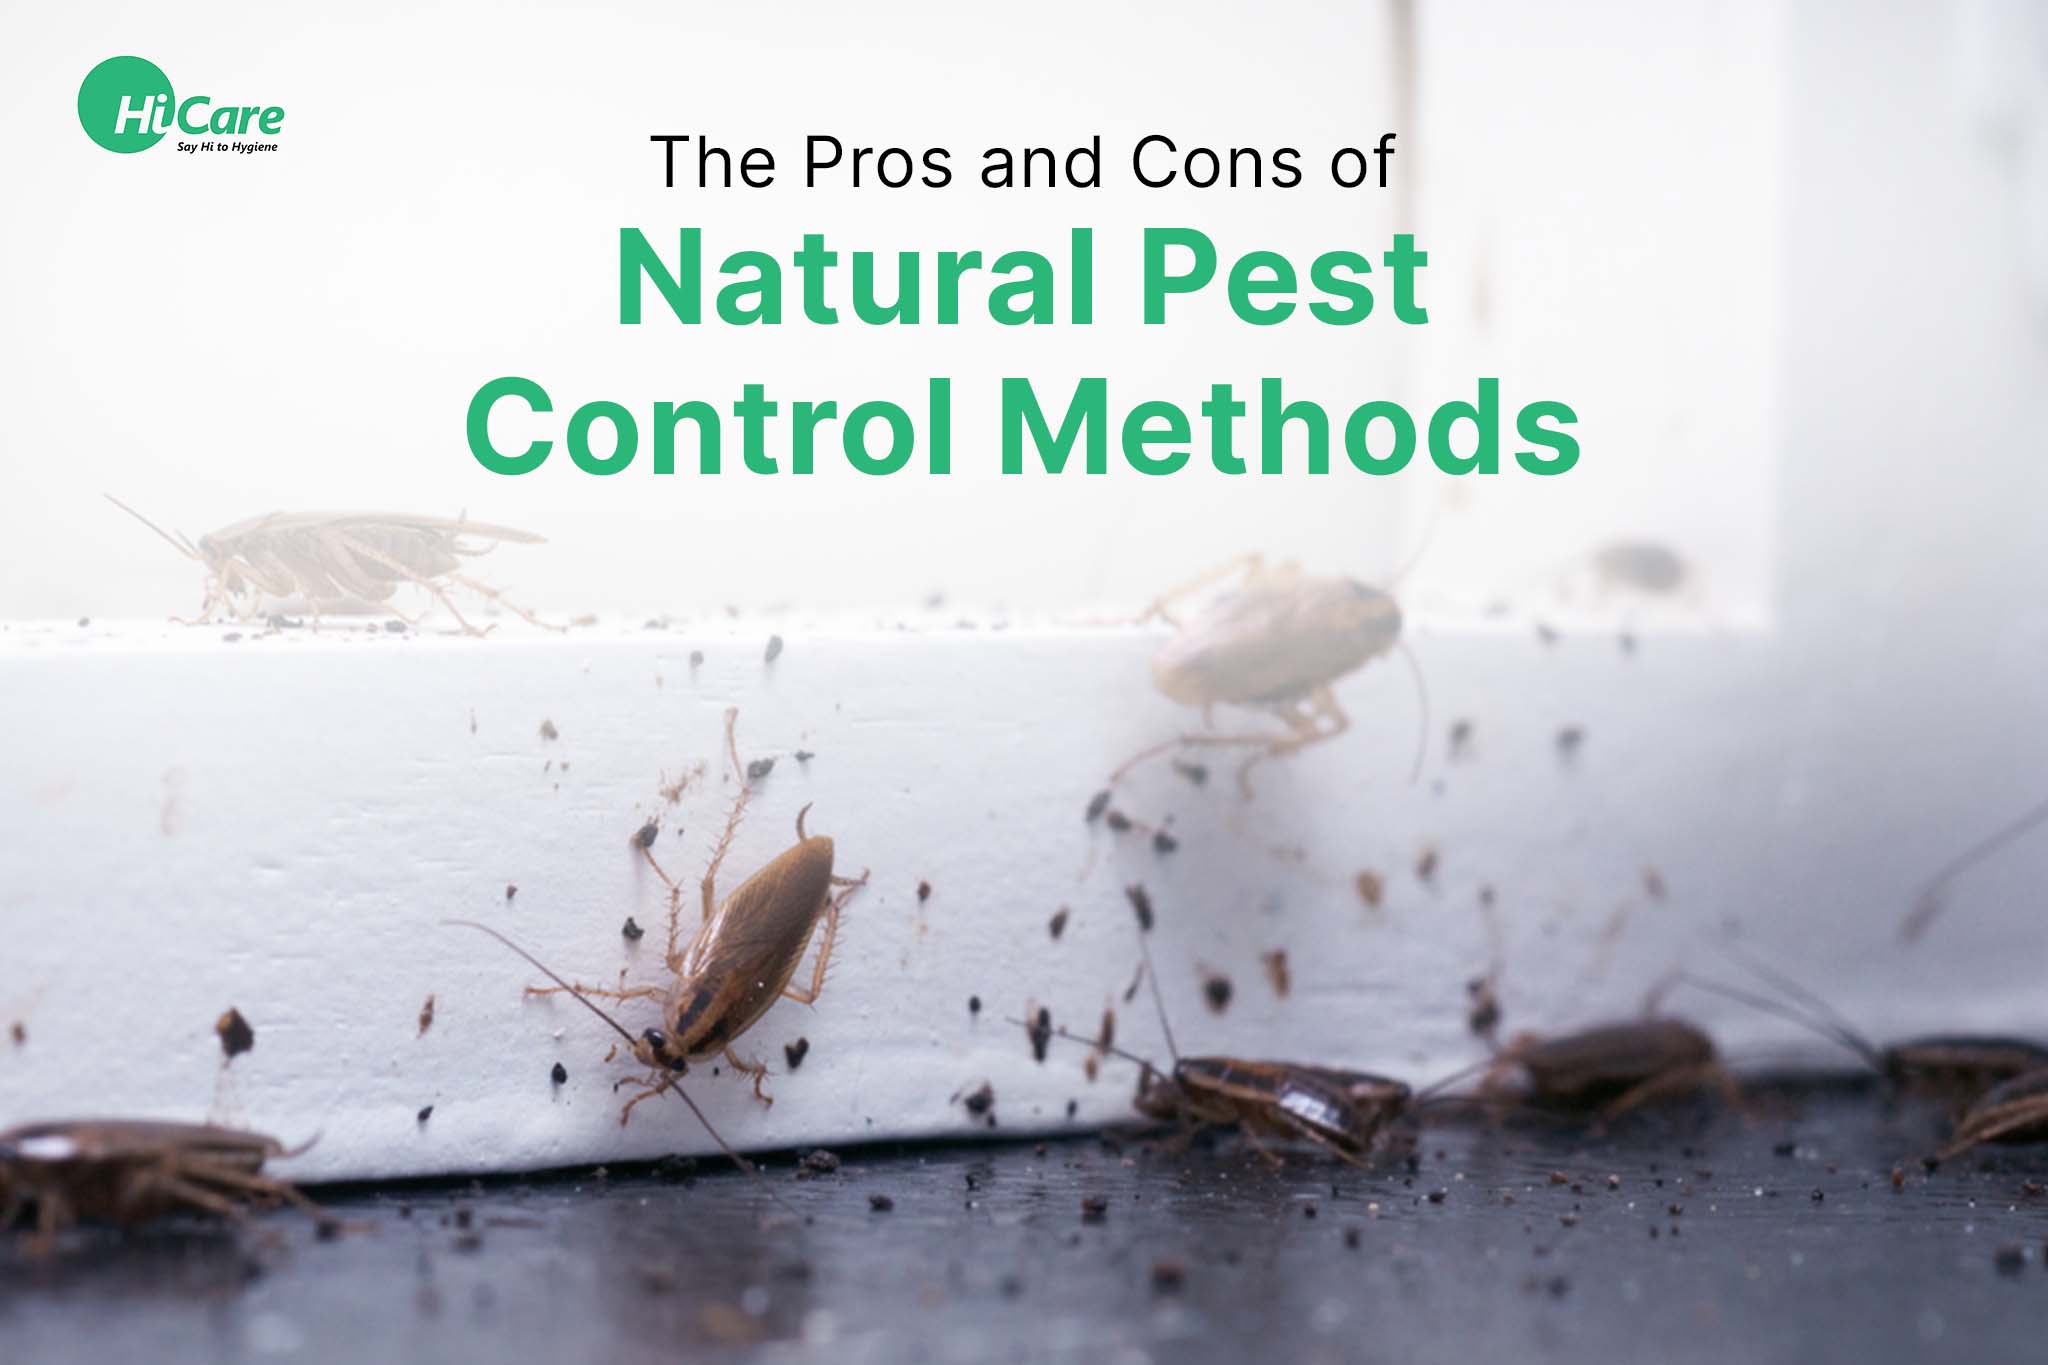 The Pros and Cons of Natural Pest Control Methods